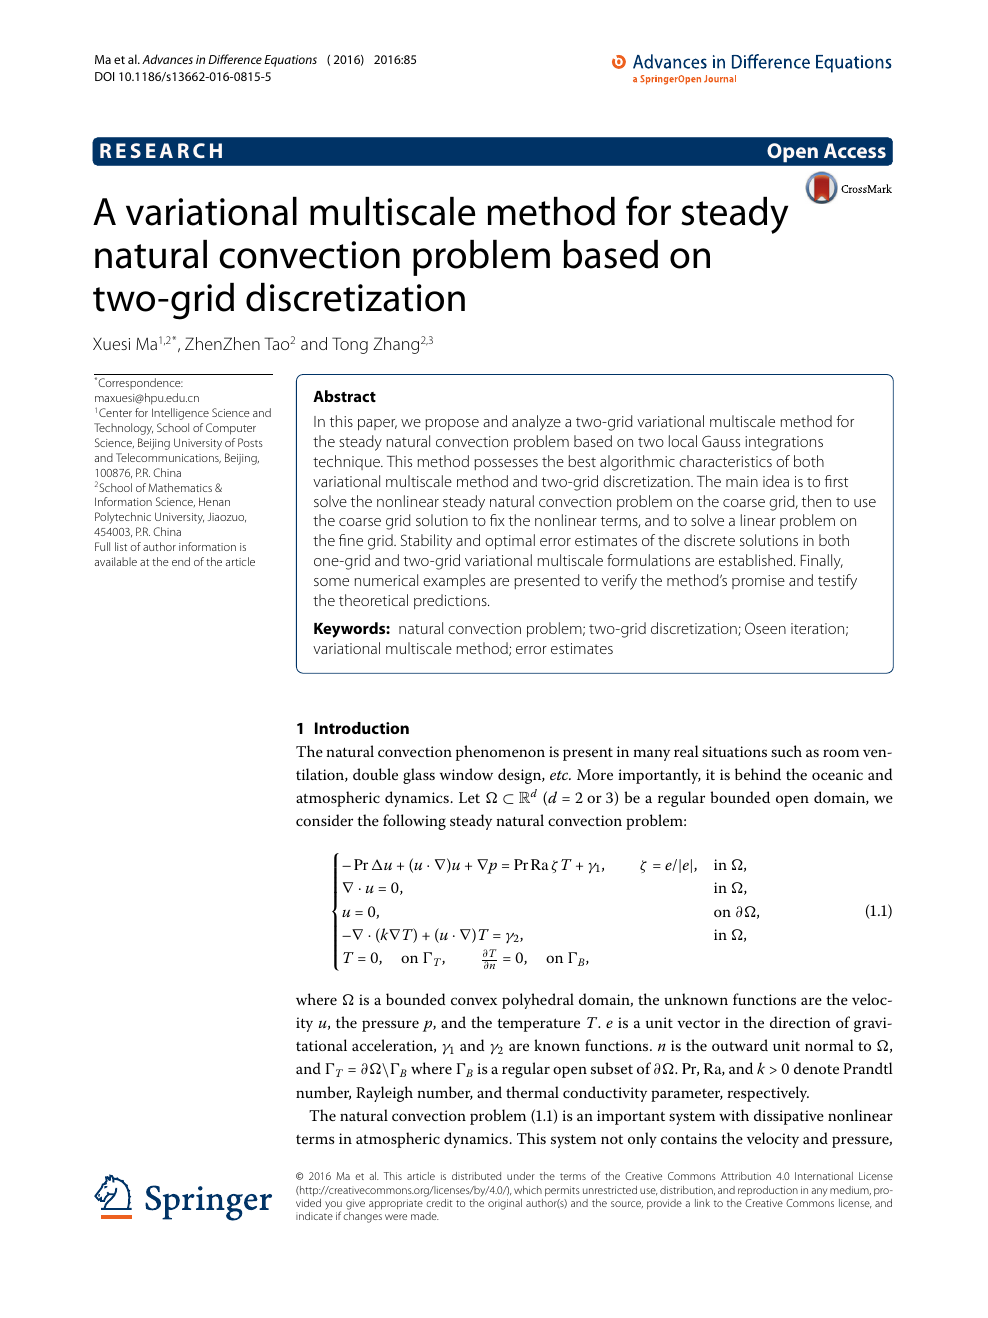 A Variational Multiscale Method For Steady Natural Convection Problem Based On Two Grid Discretization Topic Of Research Paper In Mathematics Download Scholarly Article Pdf And Read For Free On Cyberleninka Open Science